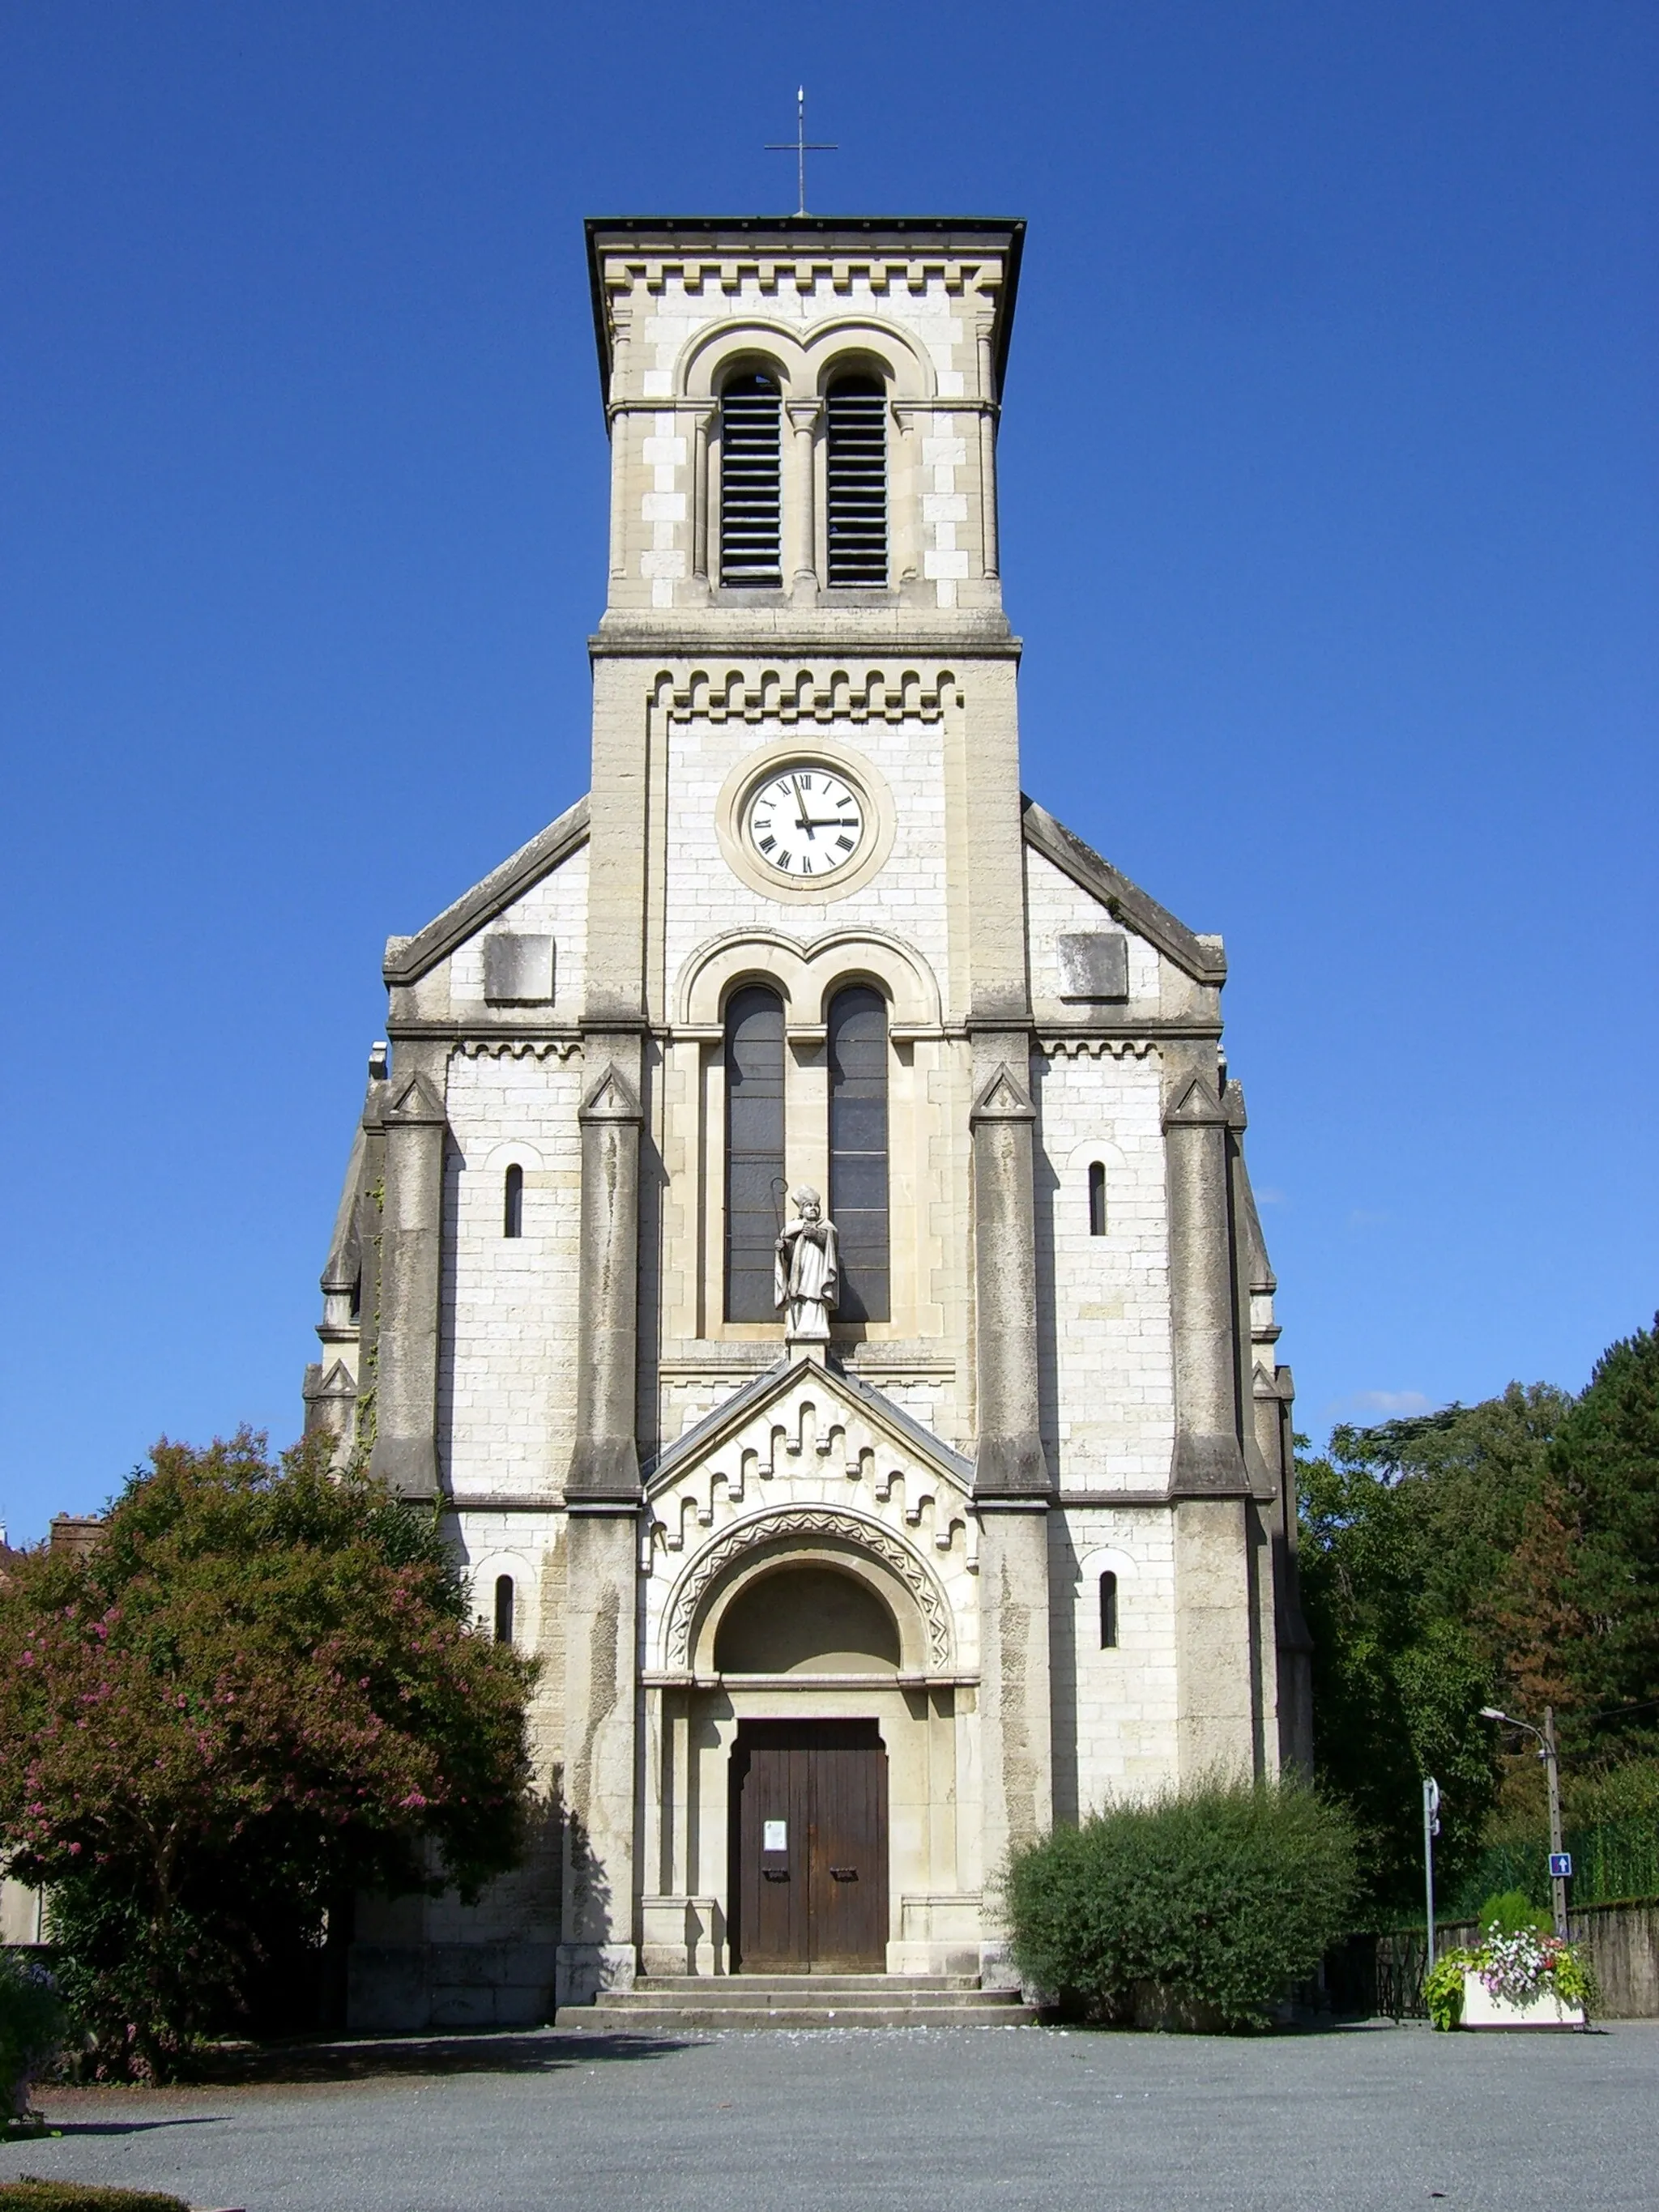 Photo showing: A church in Saint-Martin-d'Hères in France.